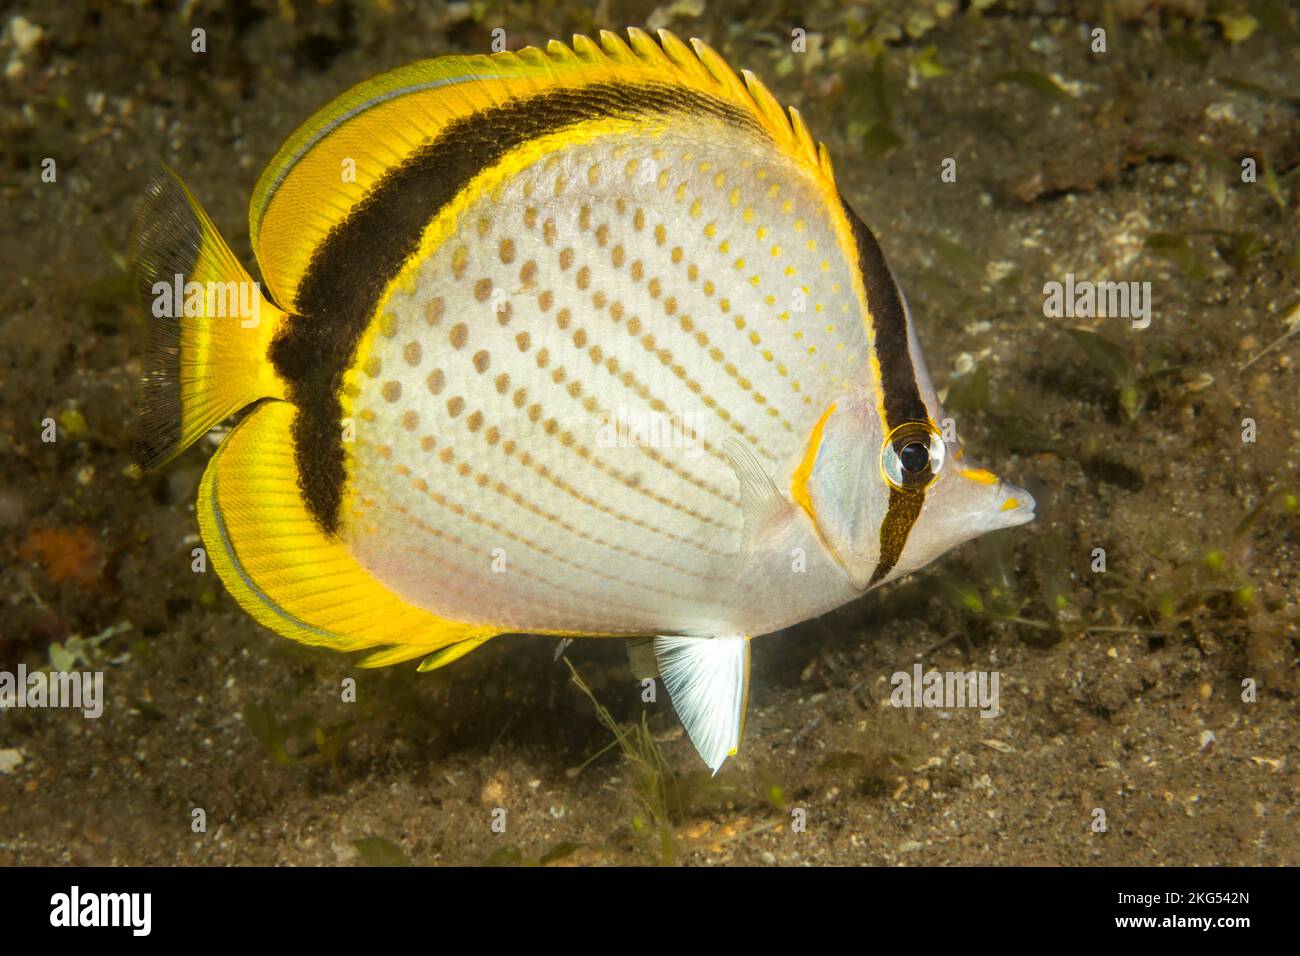 The yellow-dotted butterflyfish, Chaetodon selene, can be found as solitary individuals or in pairs, Philippines. Stock Photo